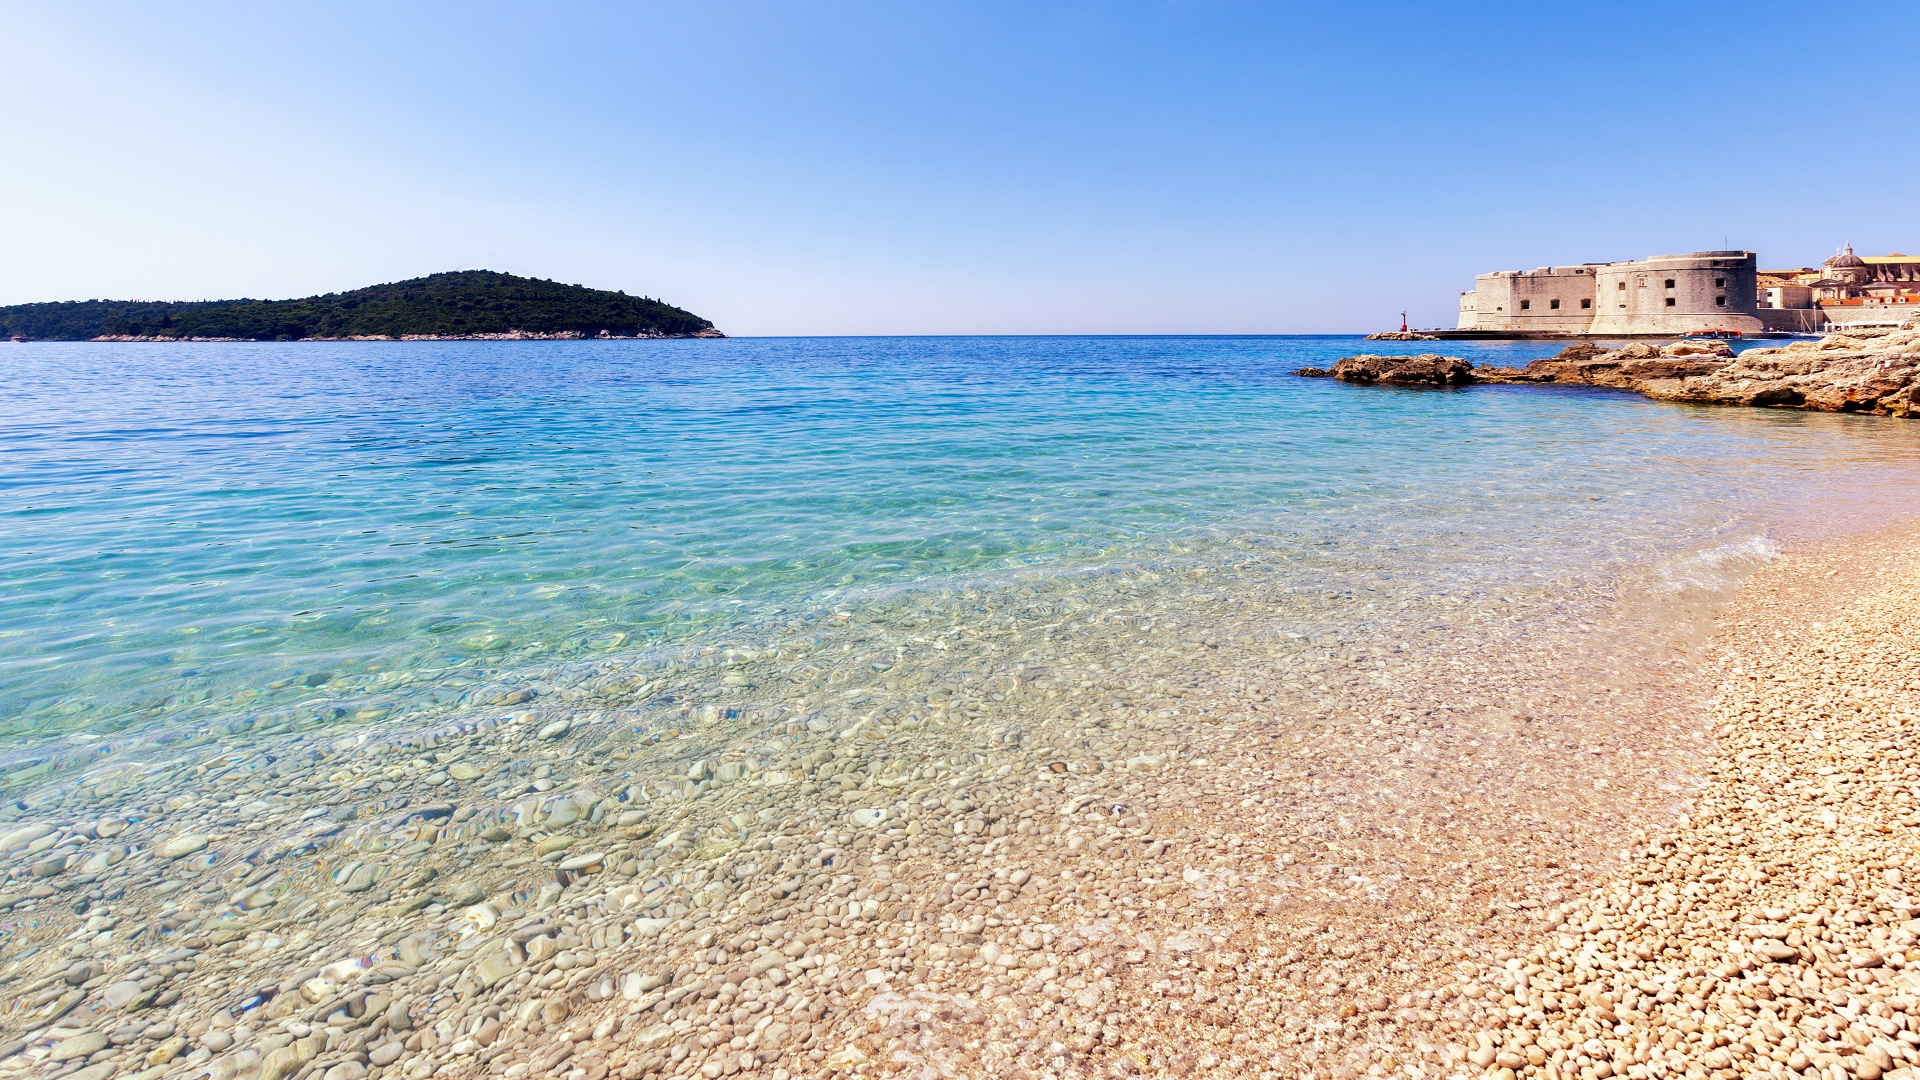 Stunning Beaches Of Dubrovnik To Clean Your Body And Soul Via Tours